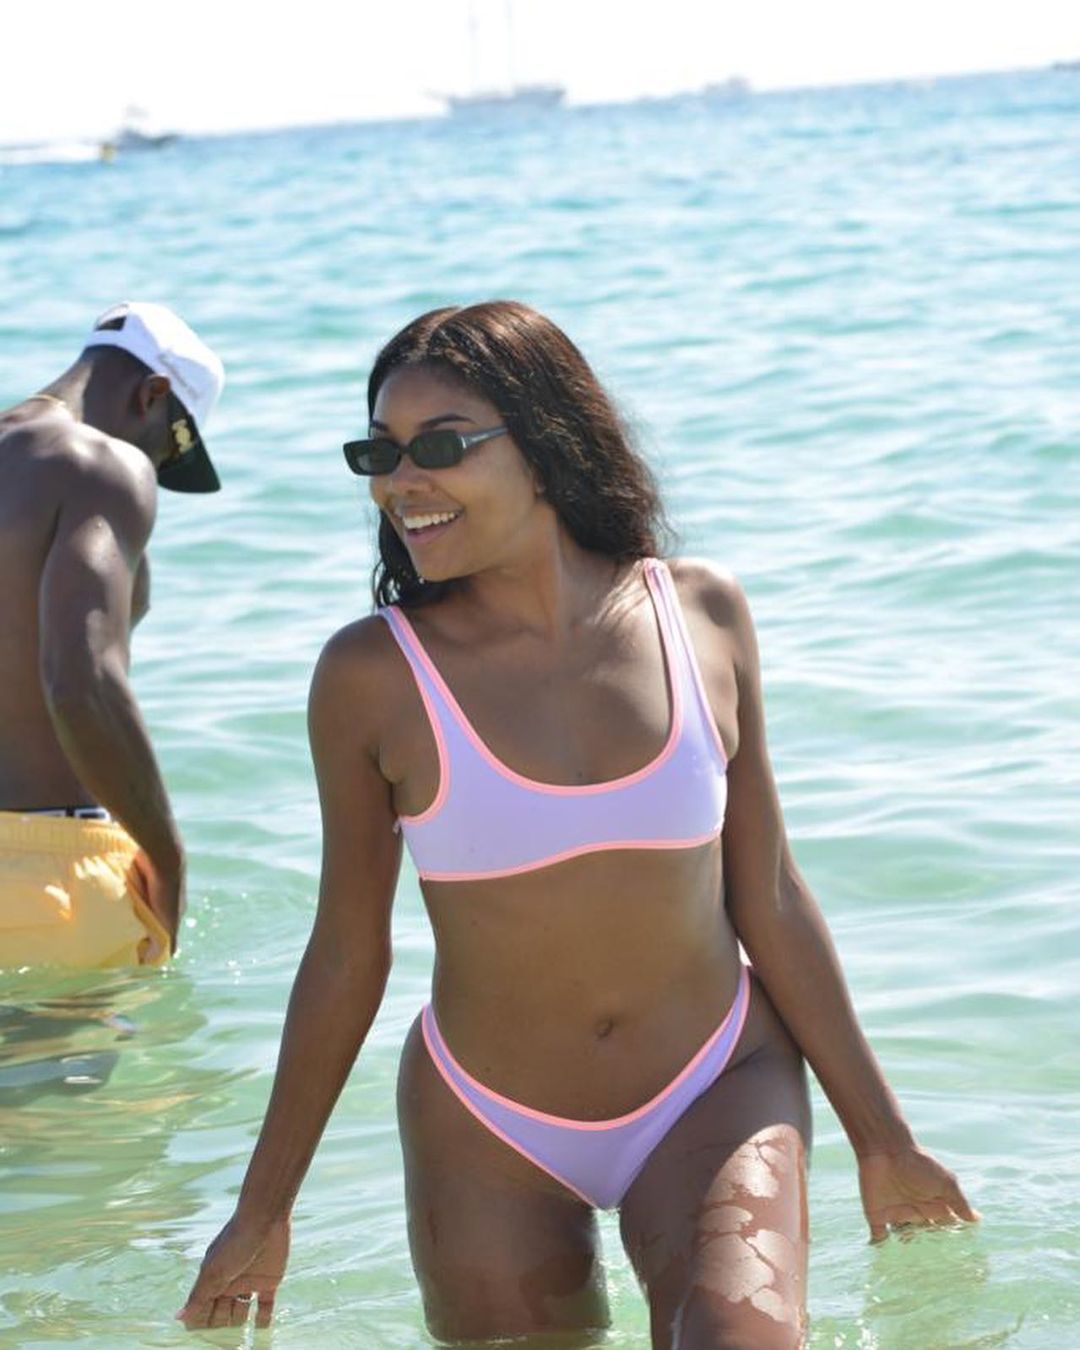 Dwyane Wade and Gabrielle Union are Rocking New Rings! - Photo 15